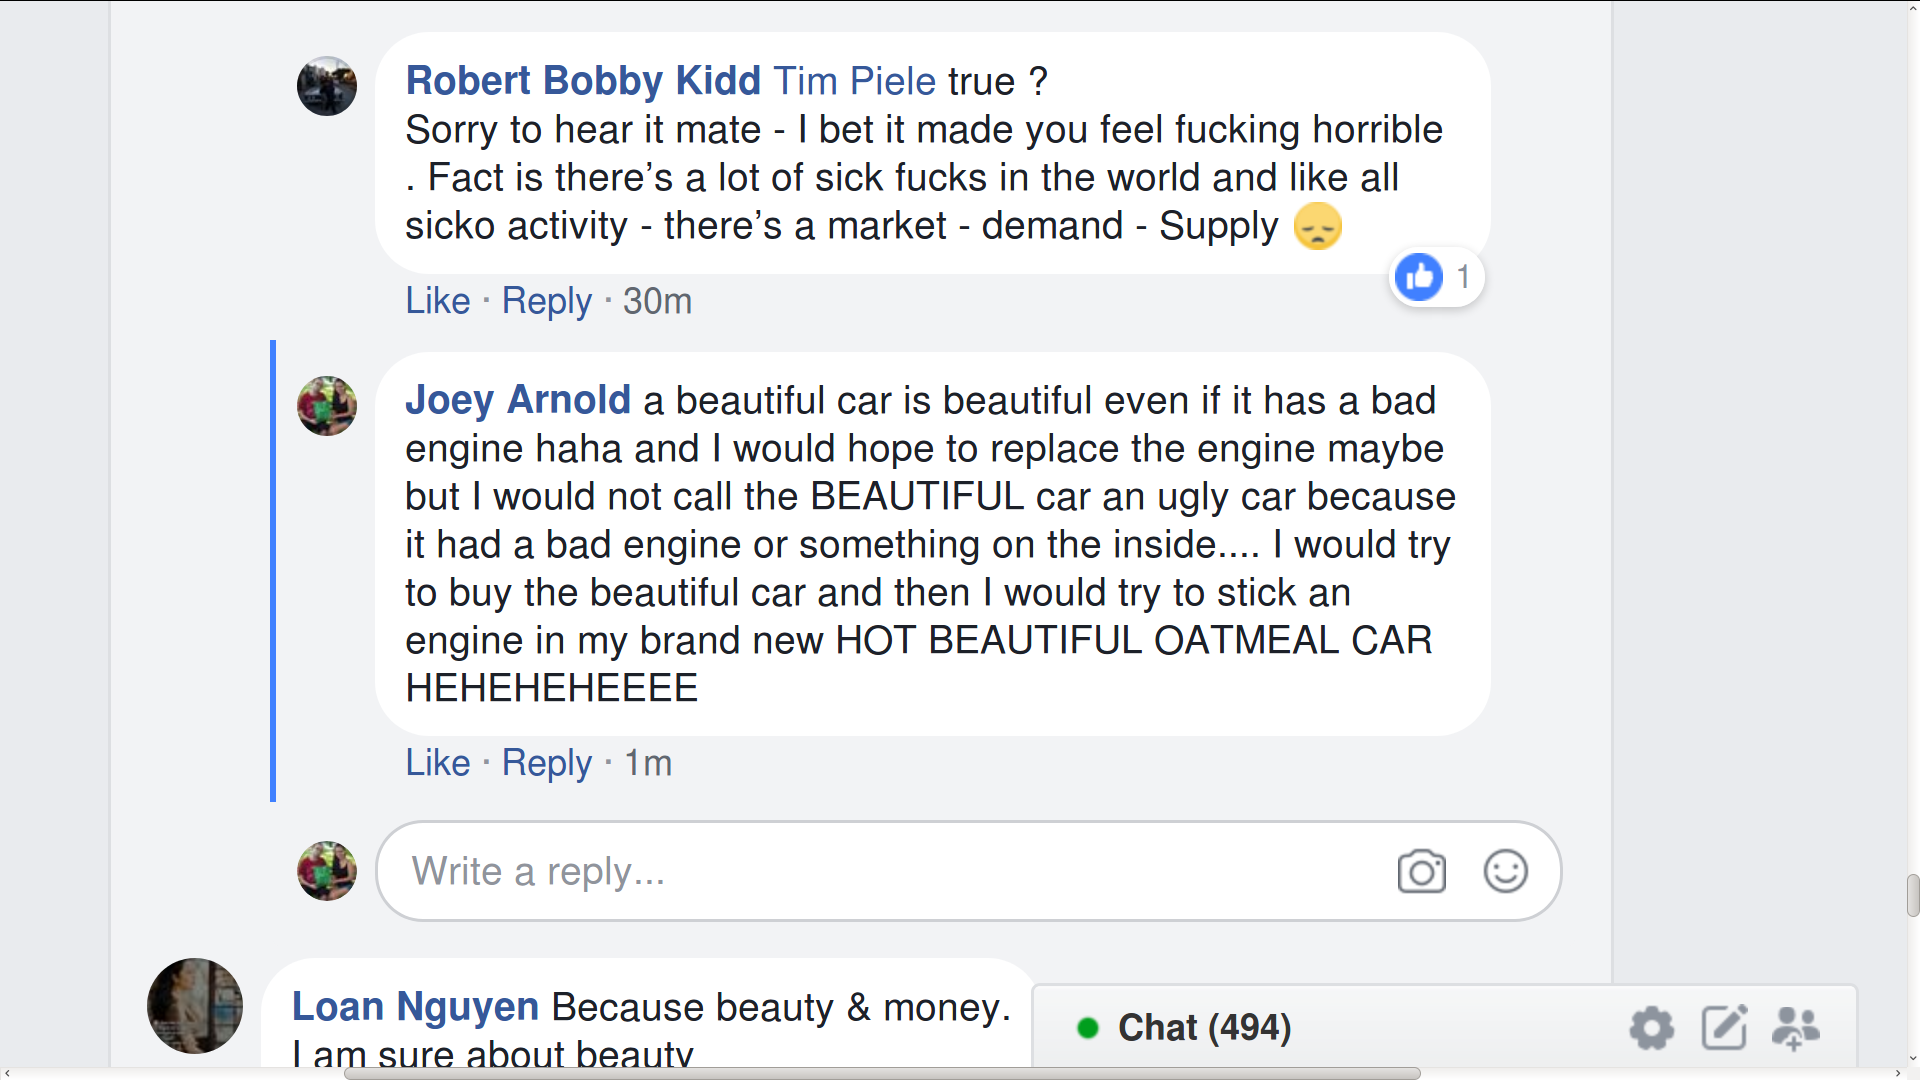 CAR BEAUTIFUL AND STICK IN ENGINE FB 2018-03-24 SAT 1131 PM LMS.png